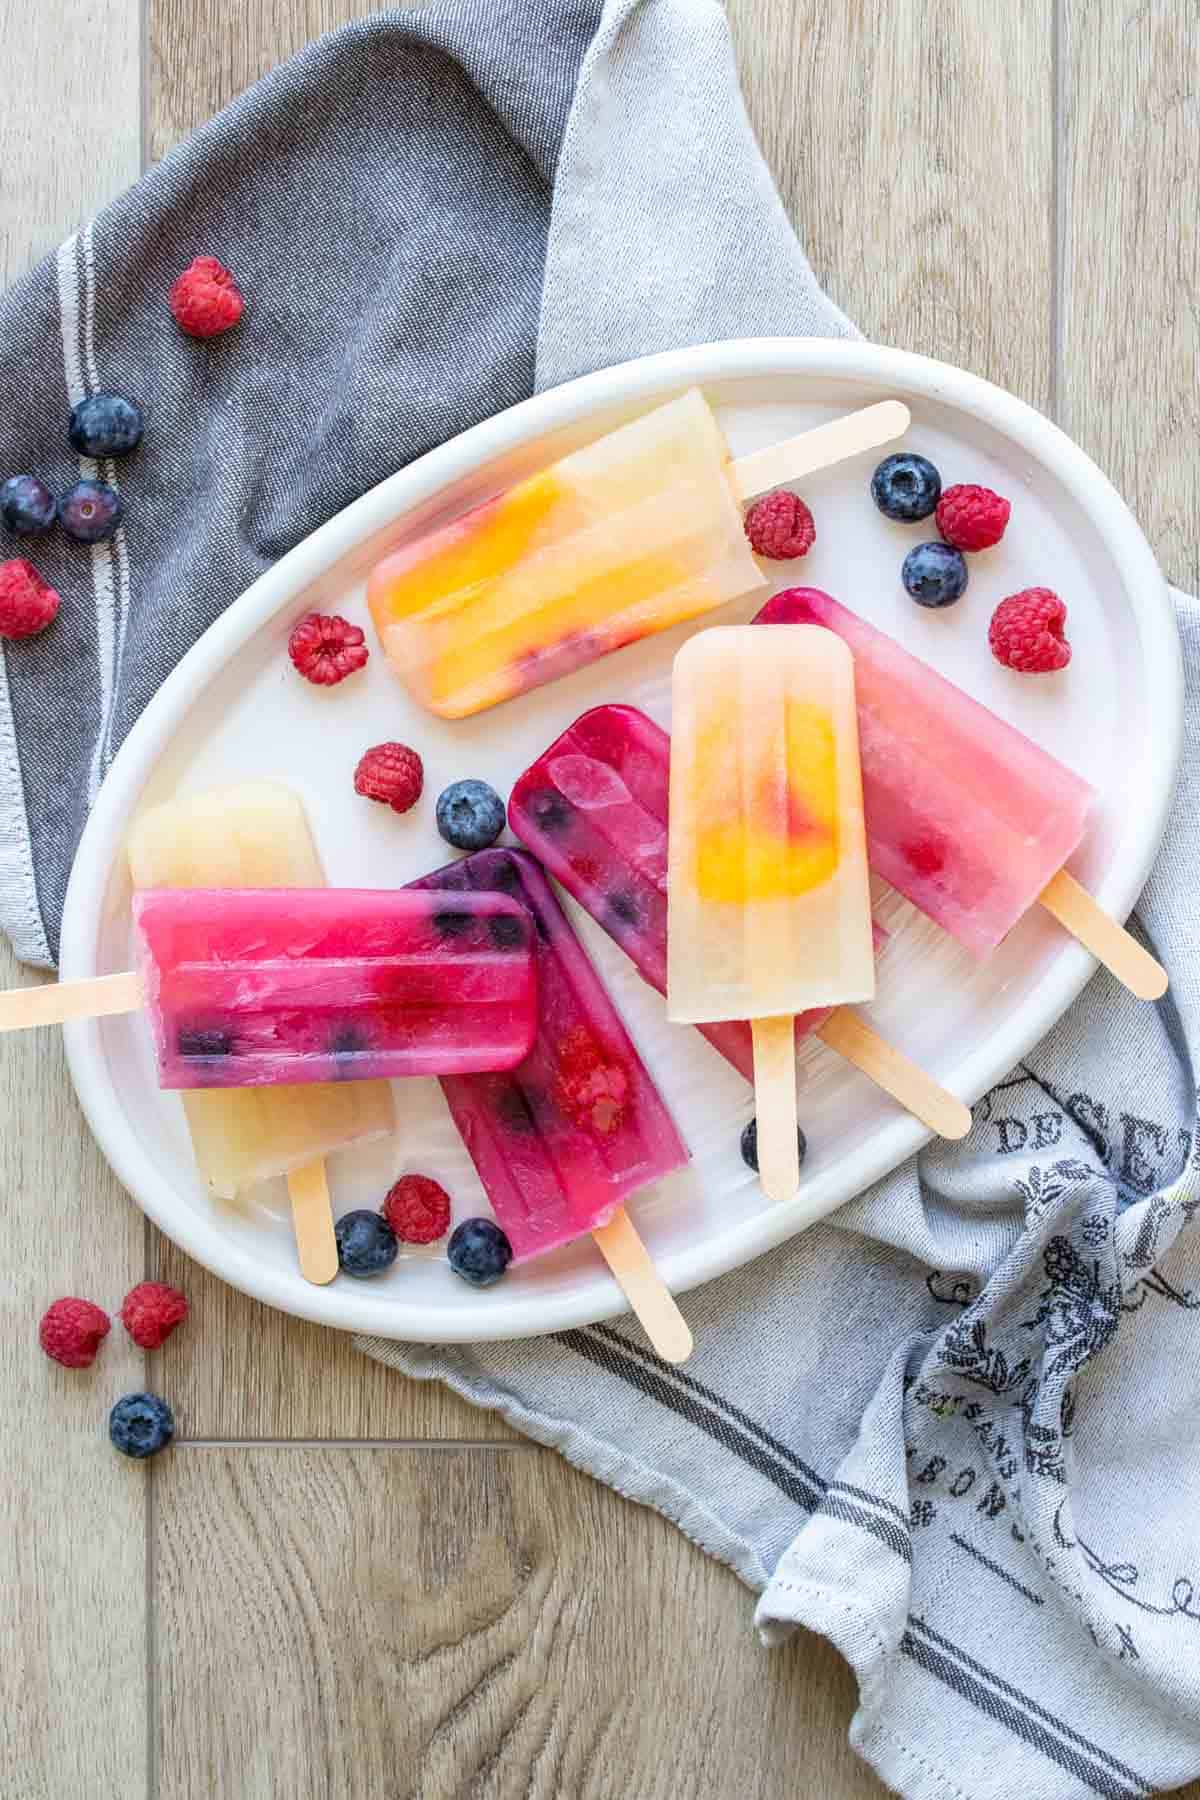 How to Make Wine Popsicles